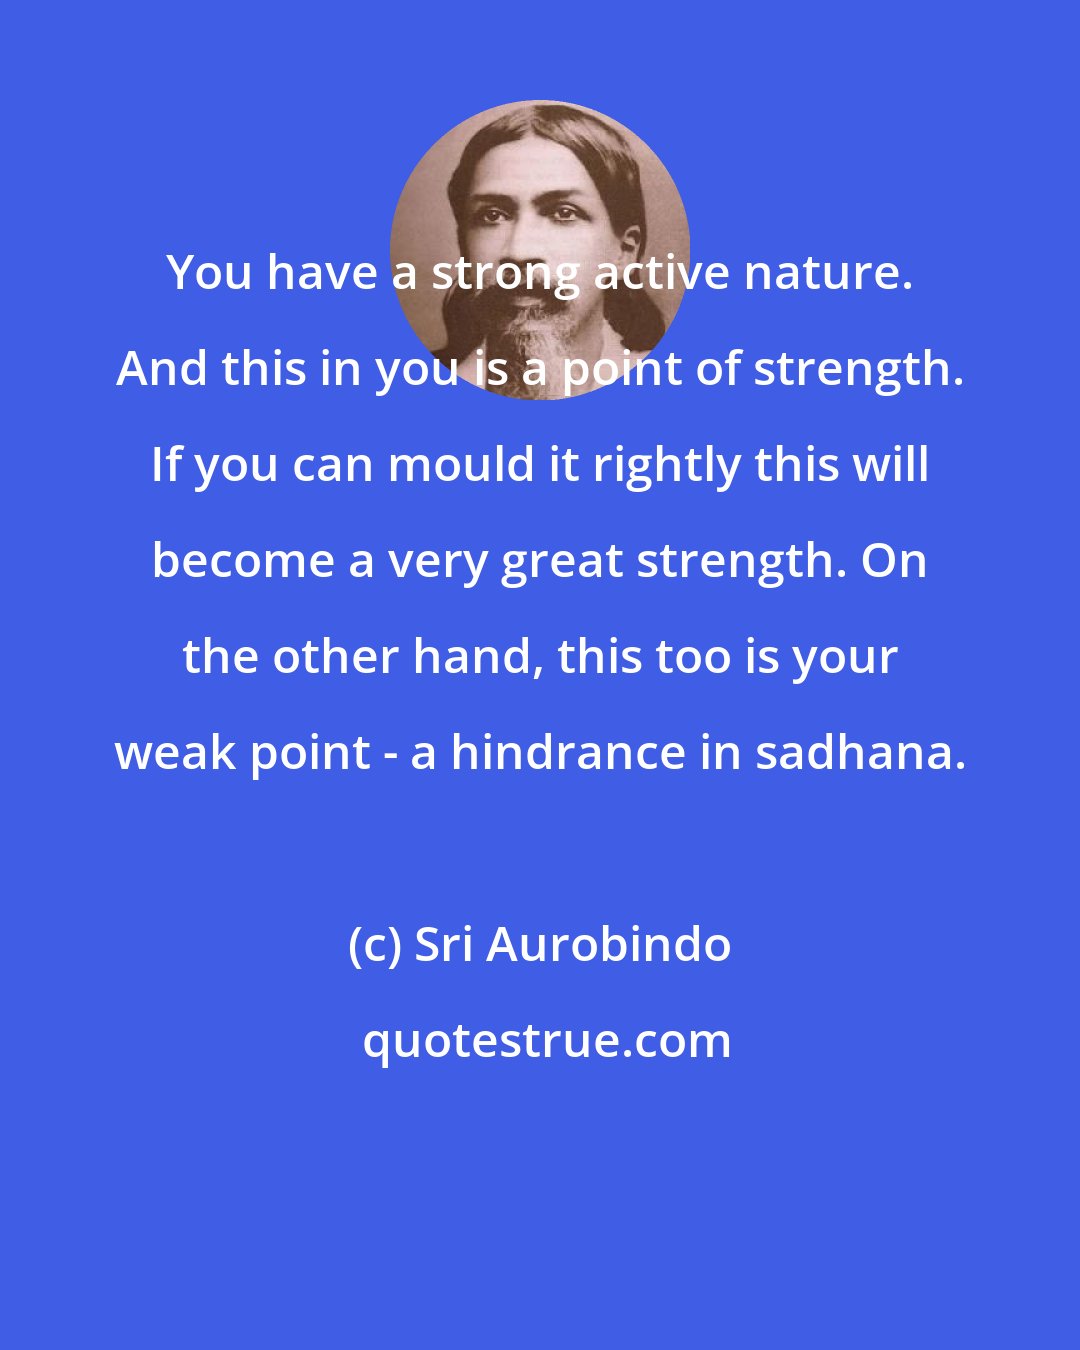 Sri Aurobindo: You have a strong active nature. And this in you is a point of strength. If you can mould it rightly this will become a very great strength. On the other hand, this too is your weak point - a hindrance in sadhana.